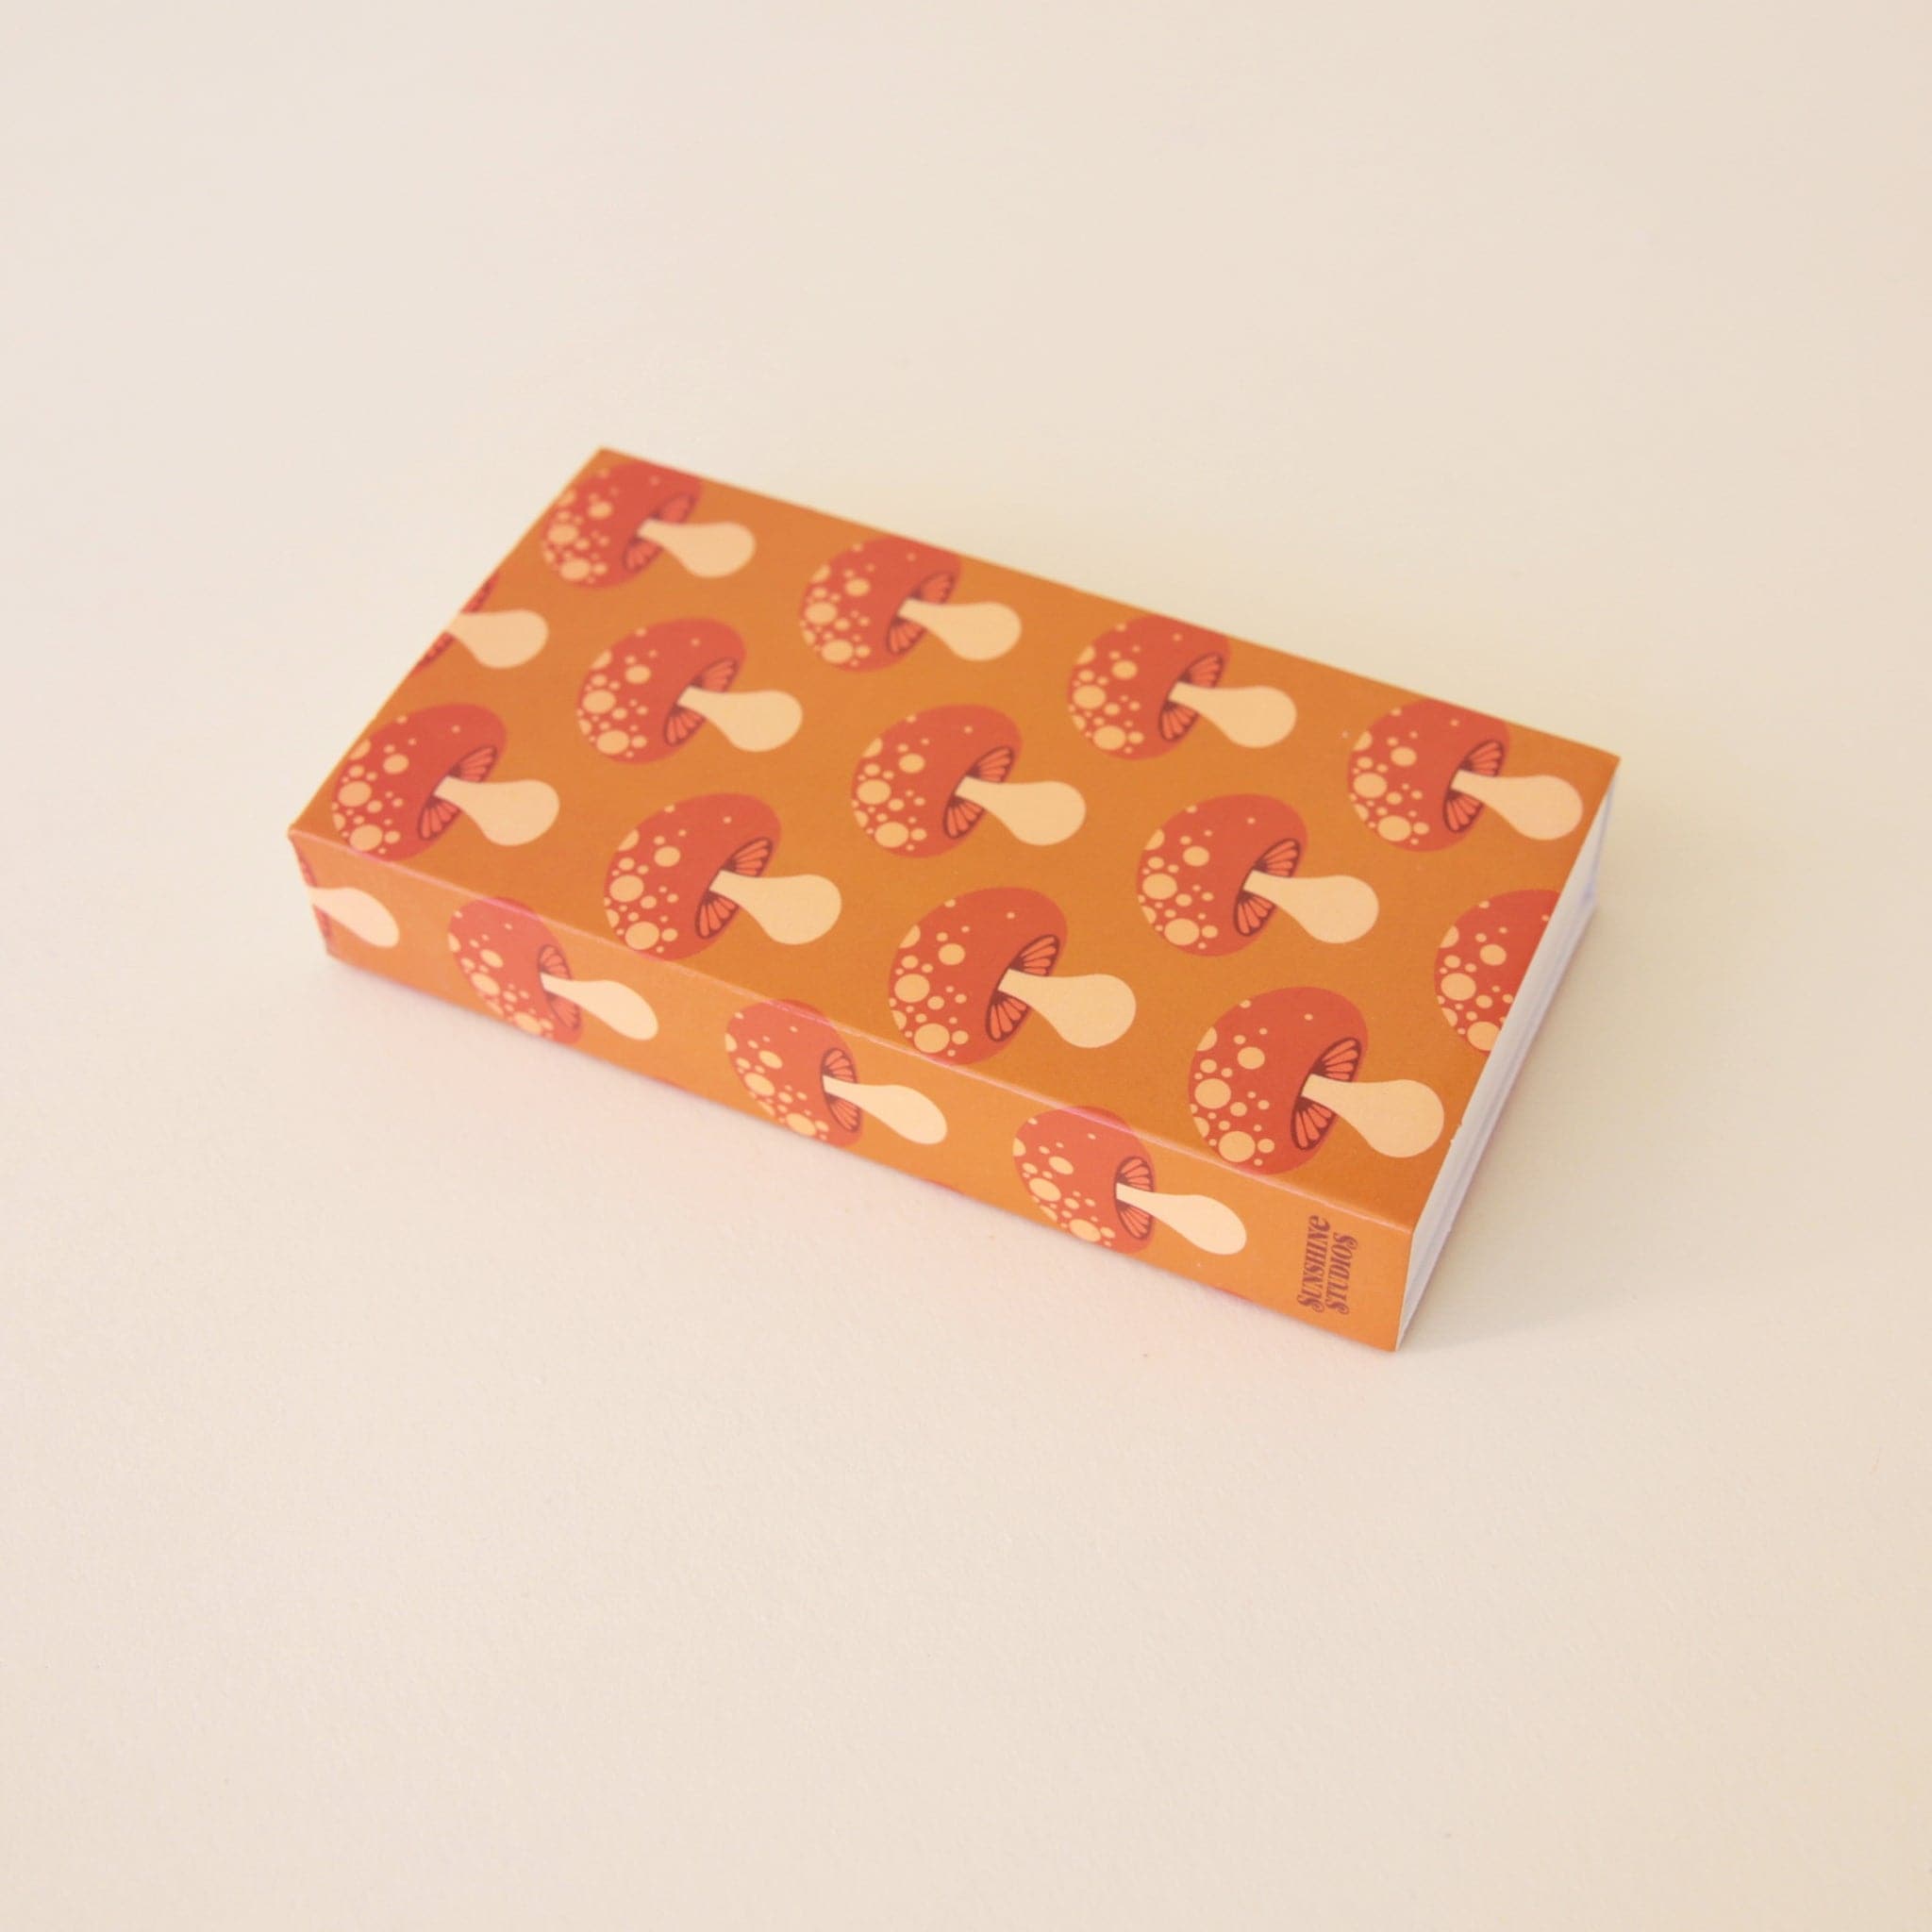 A rectangle box of matches with a repeating red mushroom design along all edges besides the top and bottom.